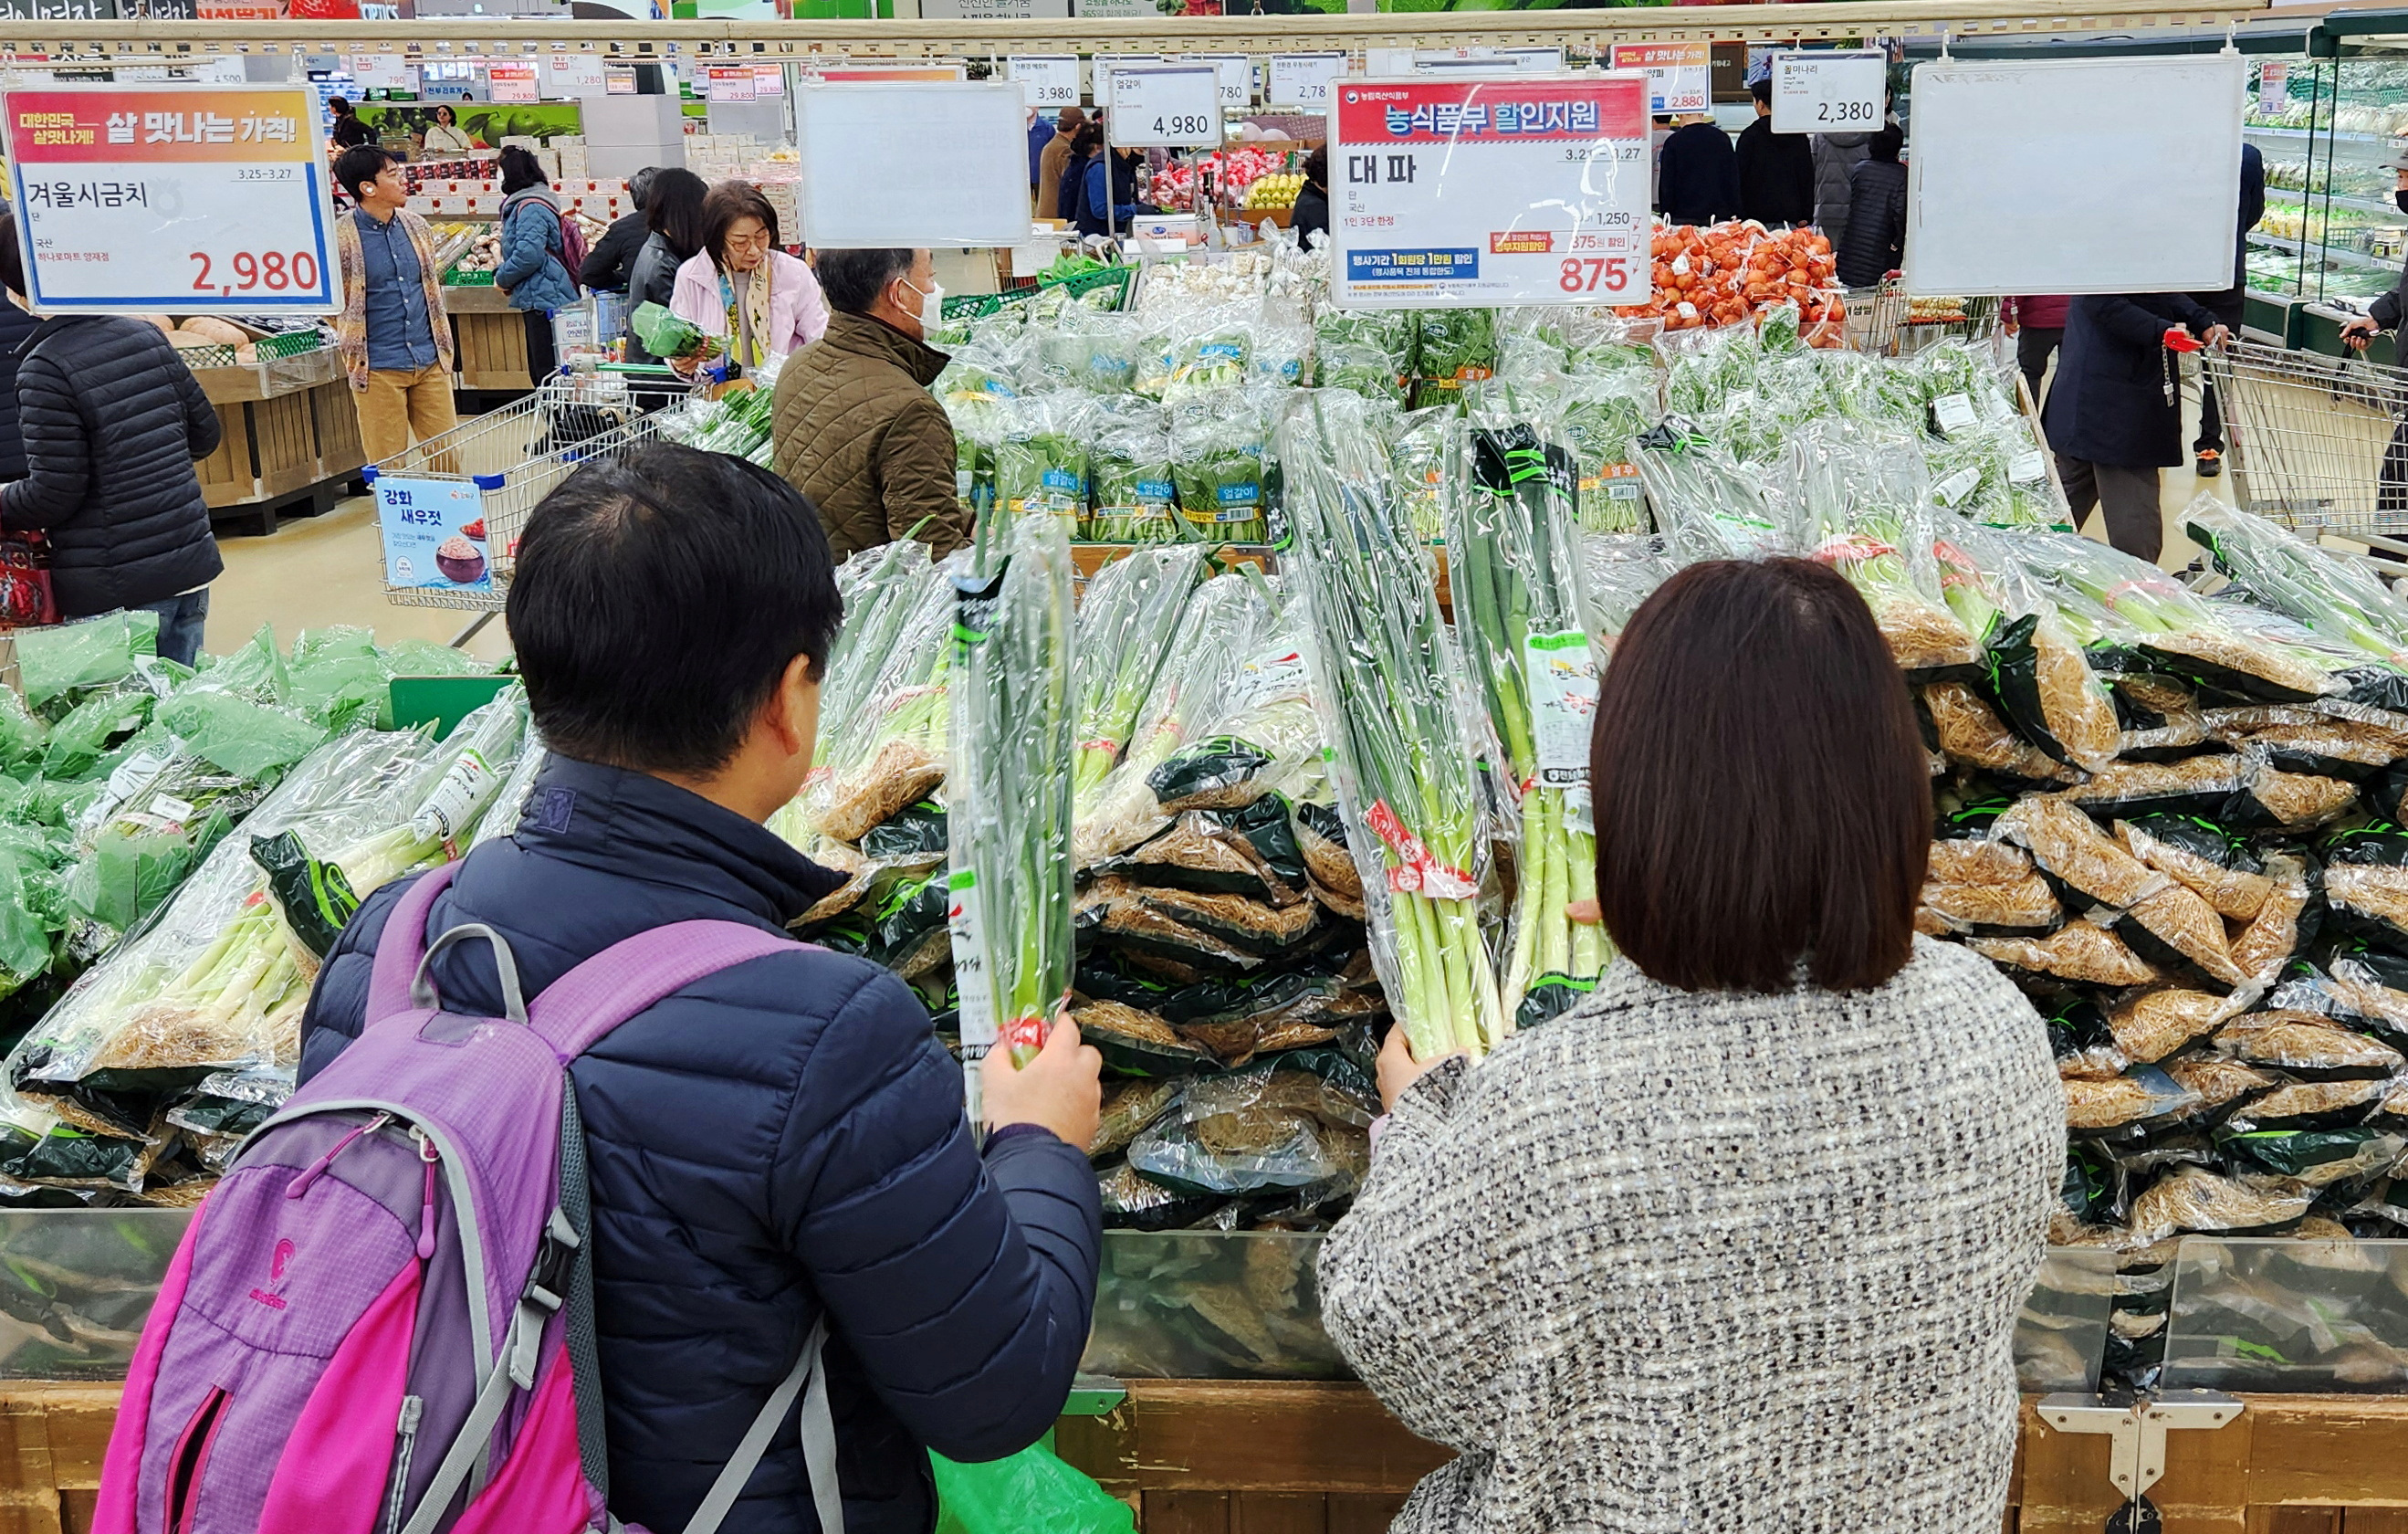 Women shop for green onions at a market in Seoul